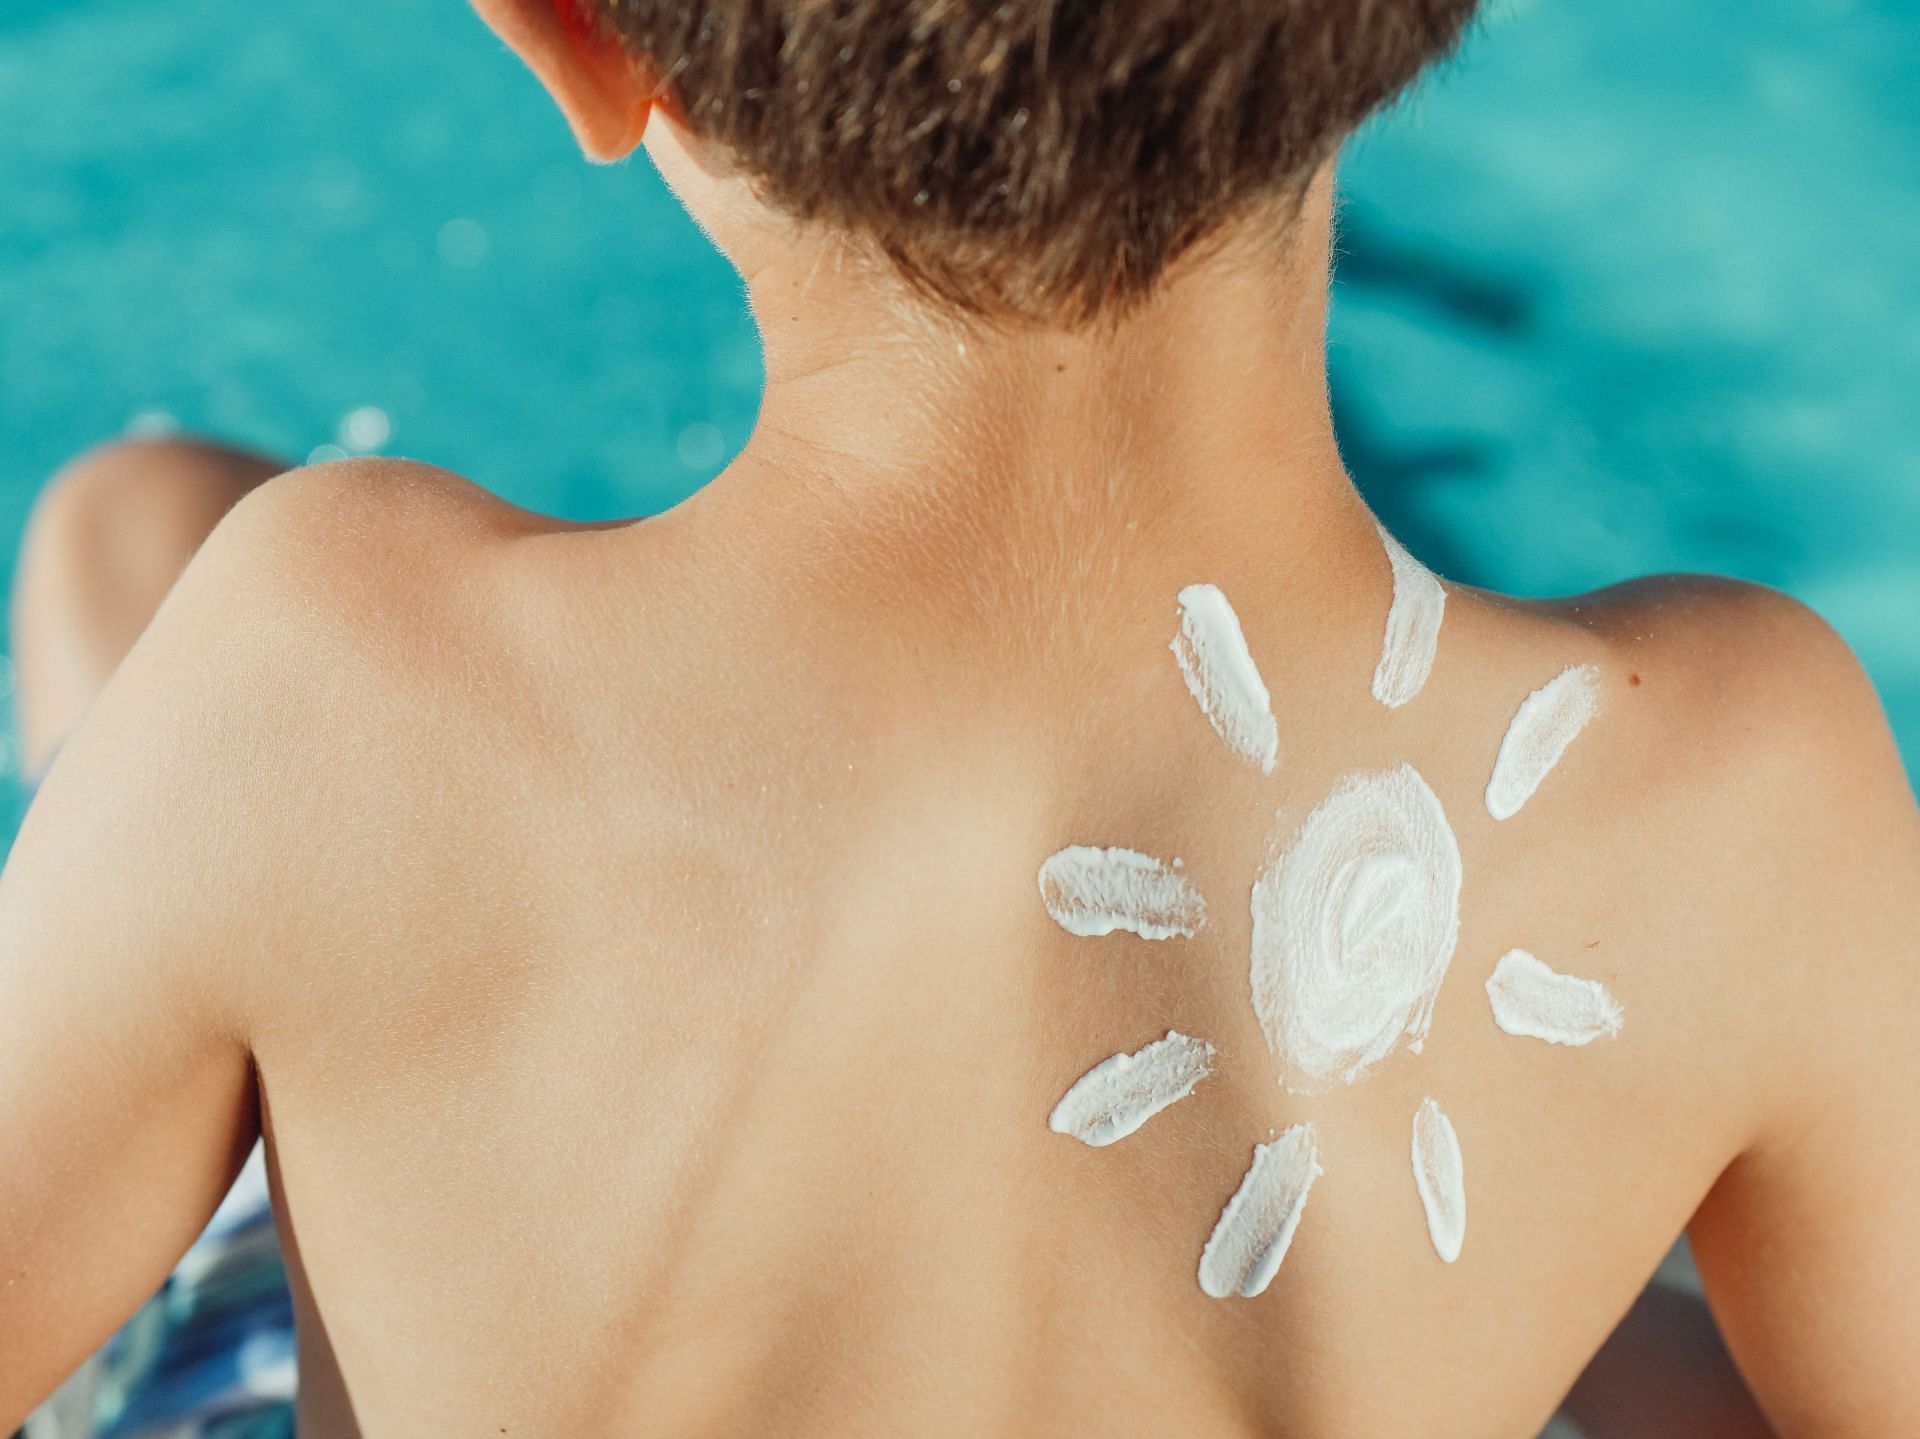 Importance of sunscreen - bad running habits to avoid (image sourced via Pexels / Photo by Kindel Media)